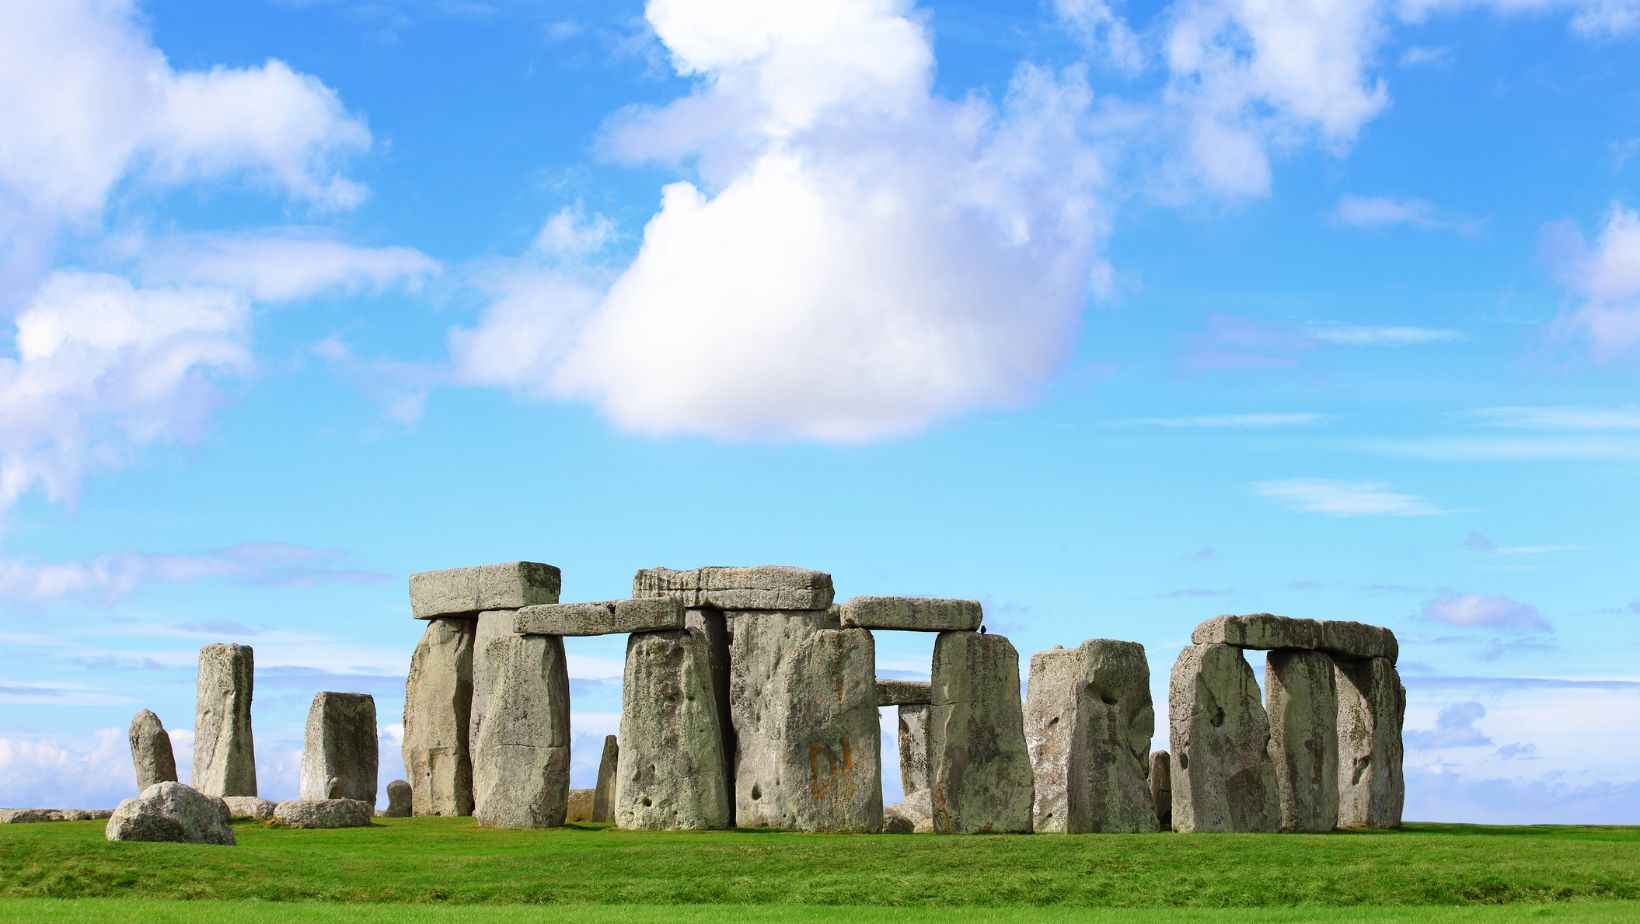 A Stone’s Throw From Stonehenge Lies A Massive New Mystery